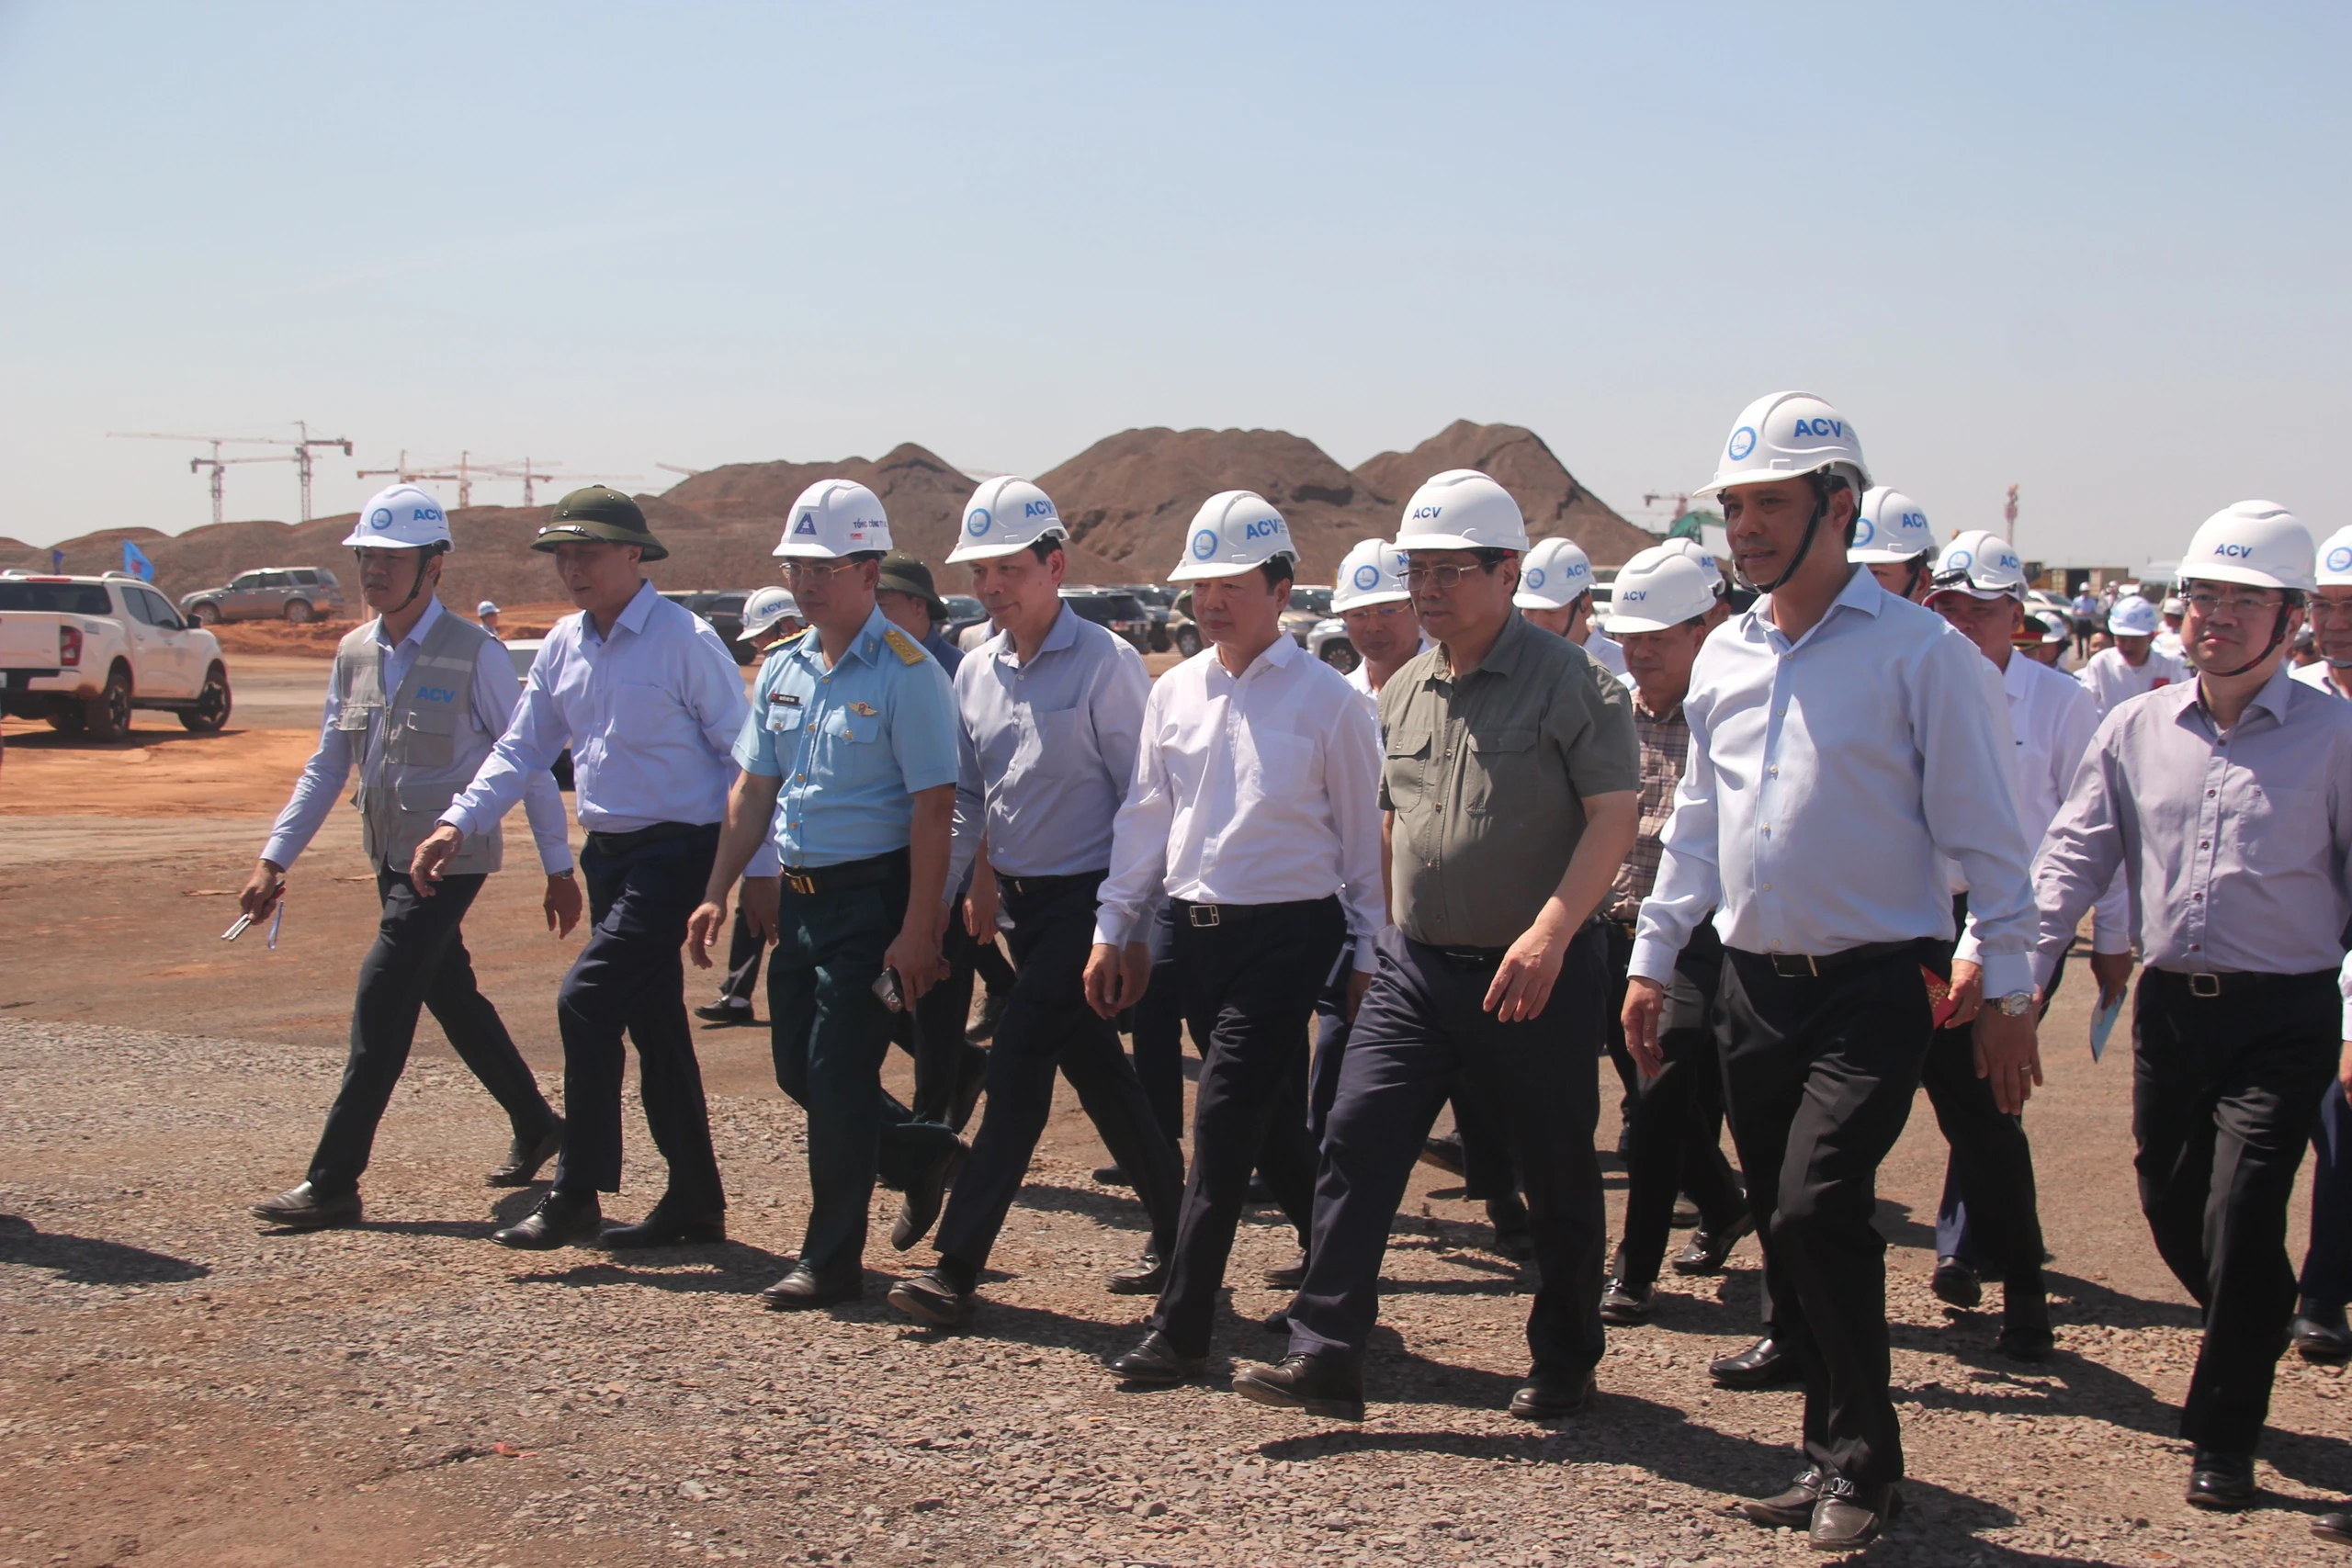 PRIME MINISTER PHAM MINH CHINH'S NEW YEAR INSPECTION AT THE LONG THANH AIRPORT CONSTRUCTION SITE